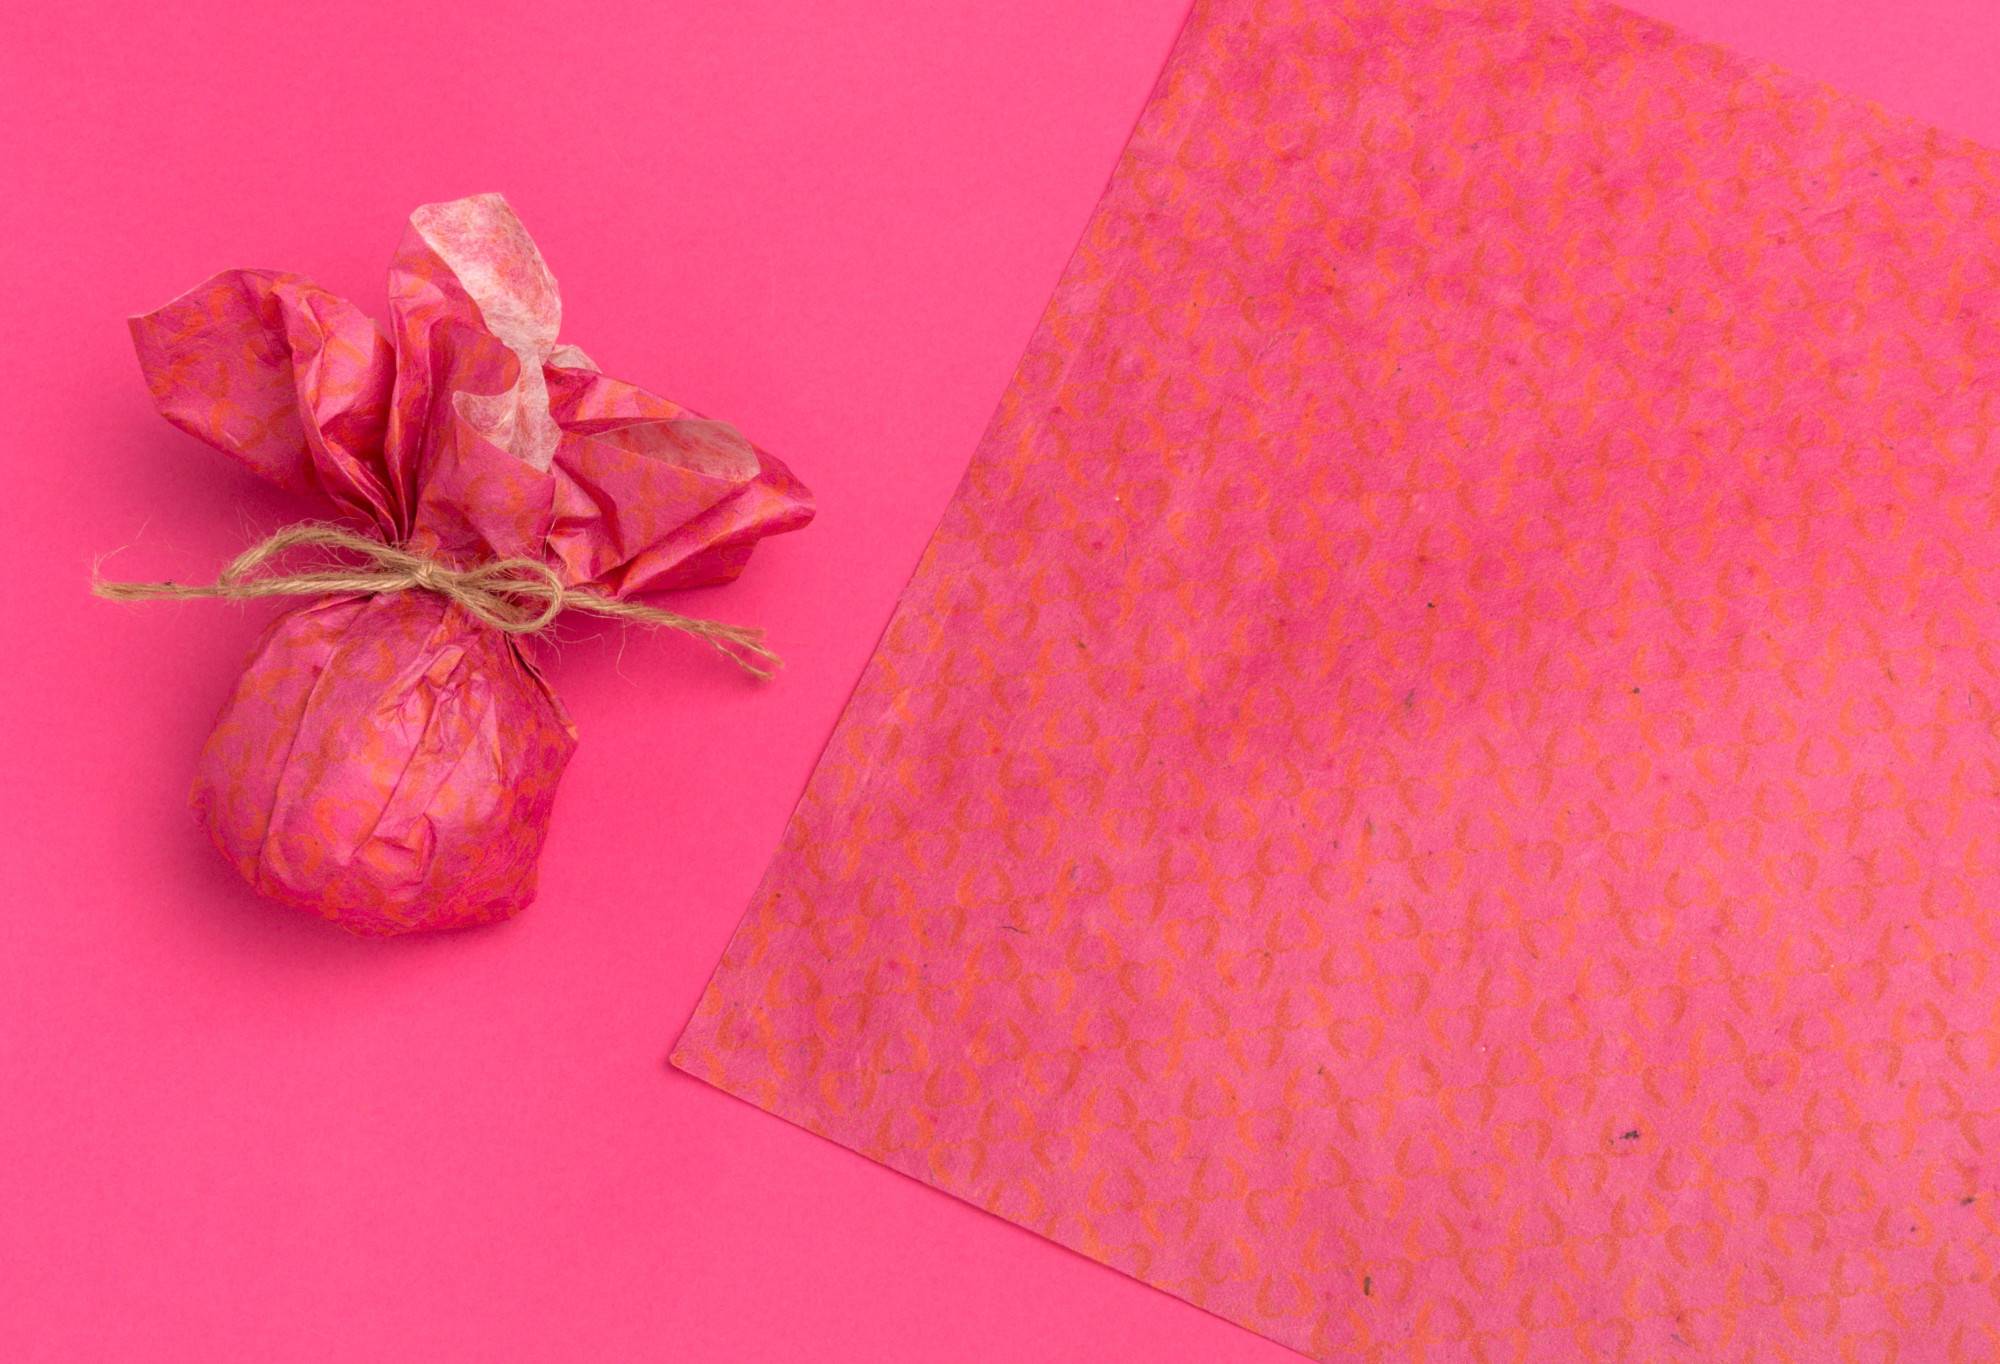 The lokta wrap is wrapped around a bath bomb, as well as laid out flat, on a bright pink background.